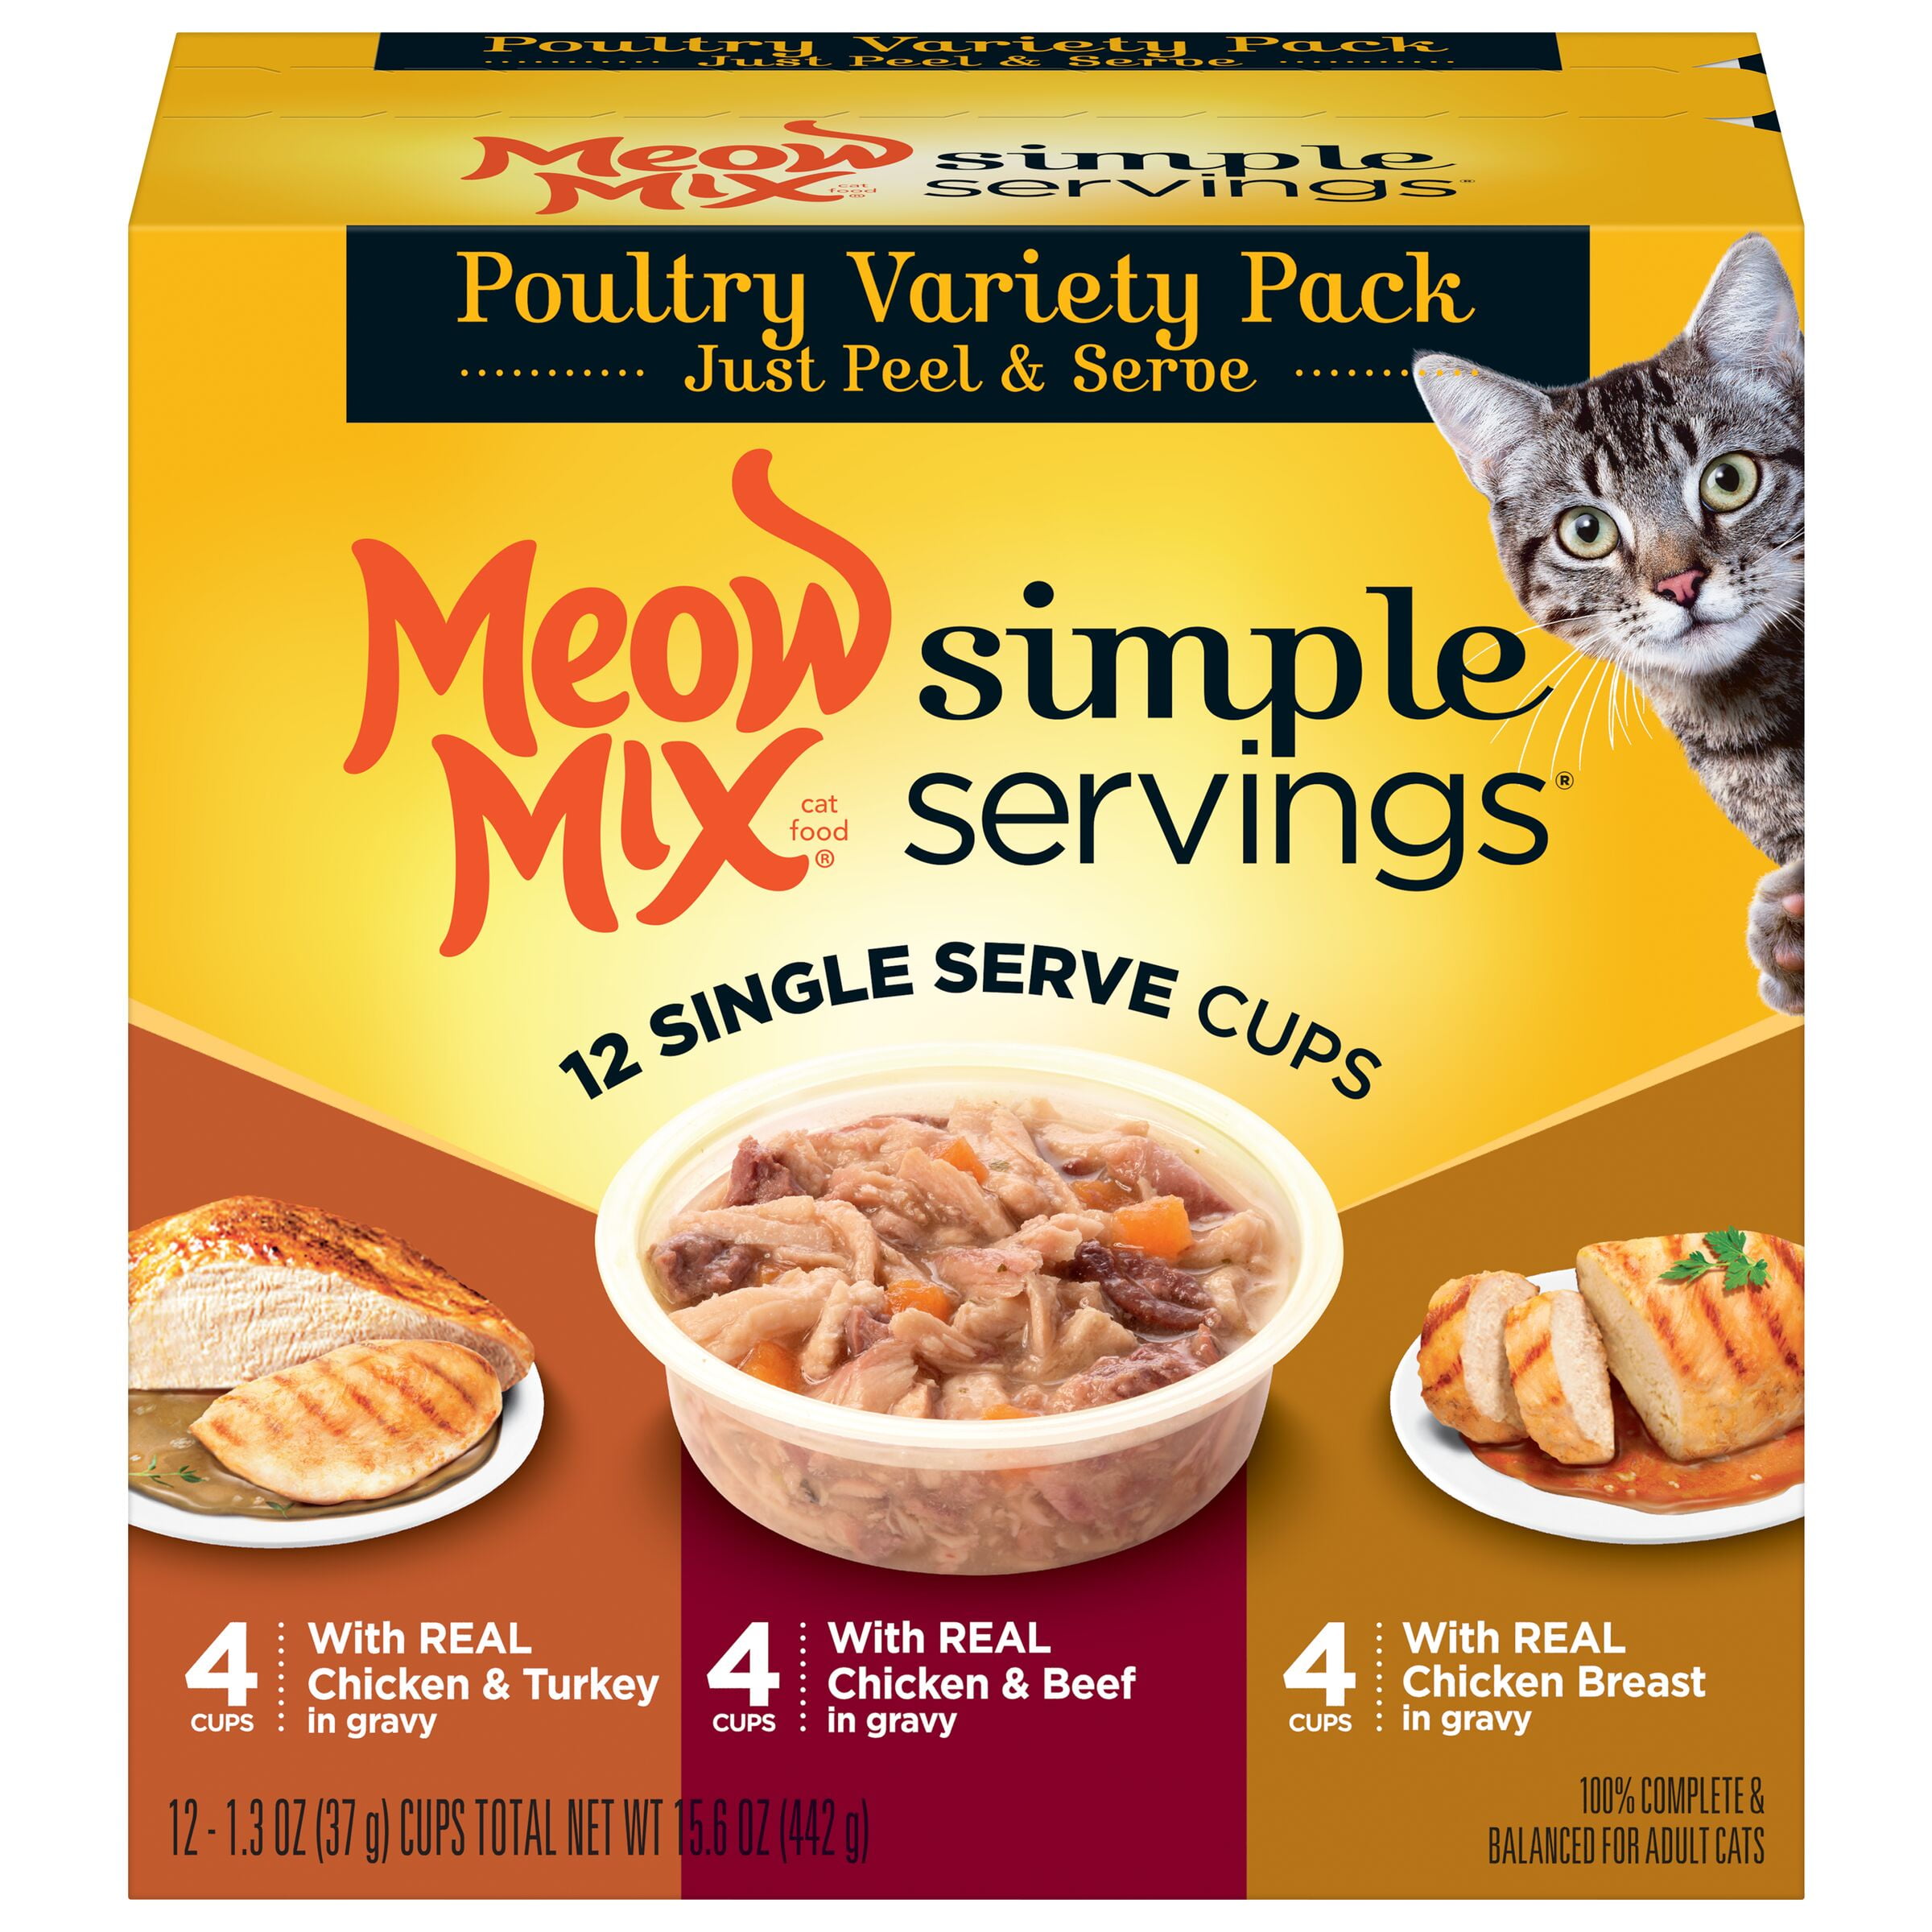 Meow Mix Simple Servings Wet Cat Food Poultry Variety Pack, 1.3oz Cups, 12 ct.